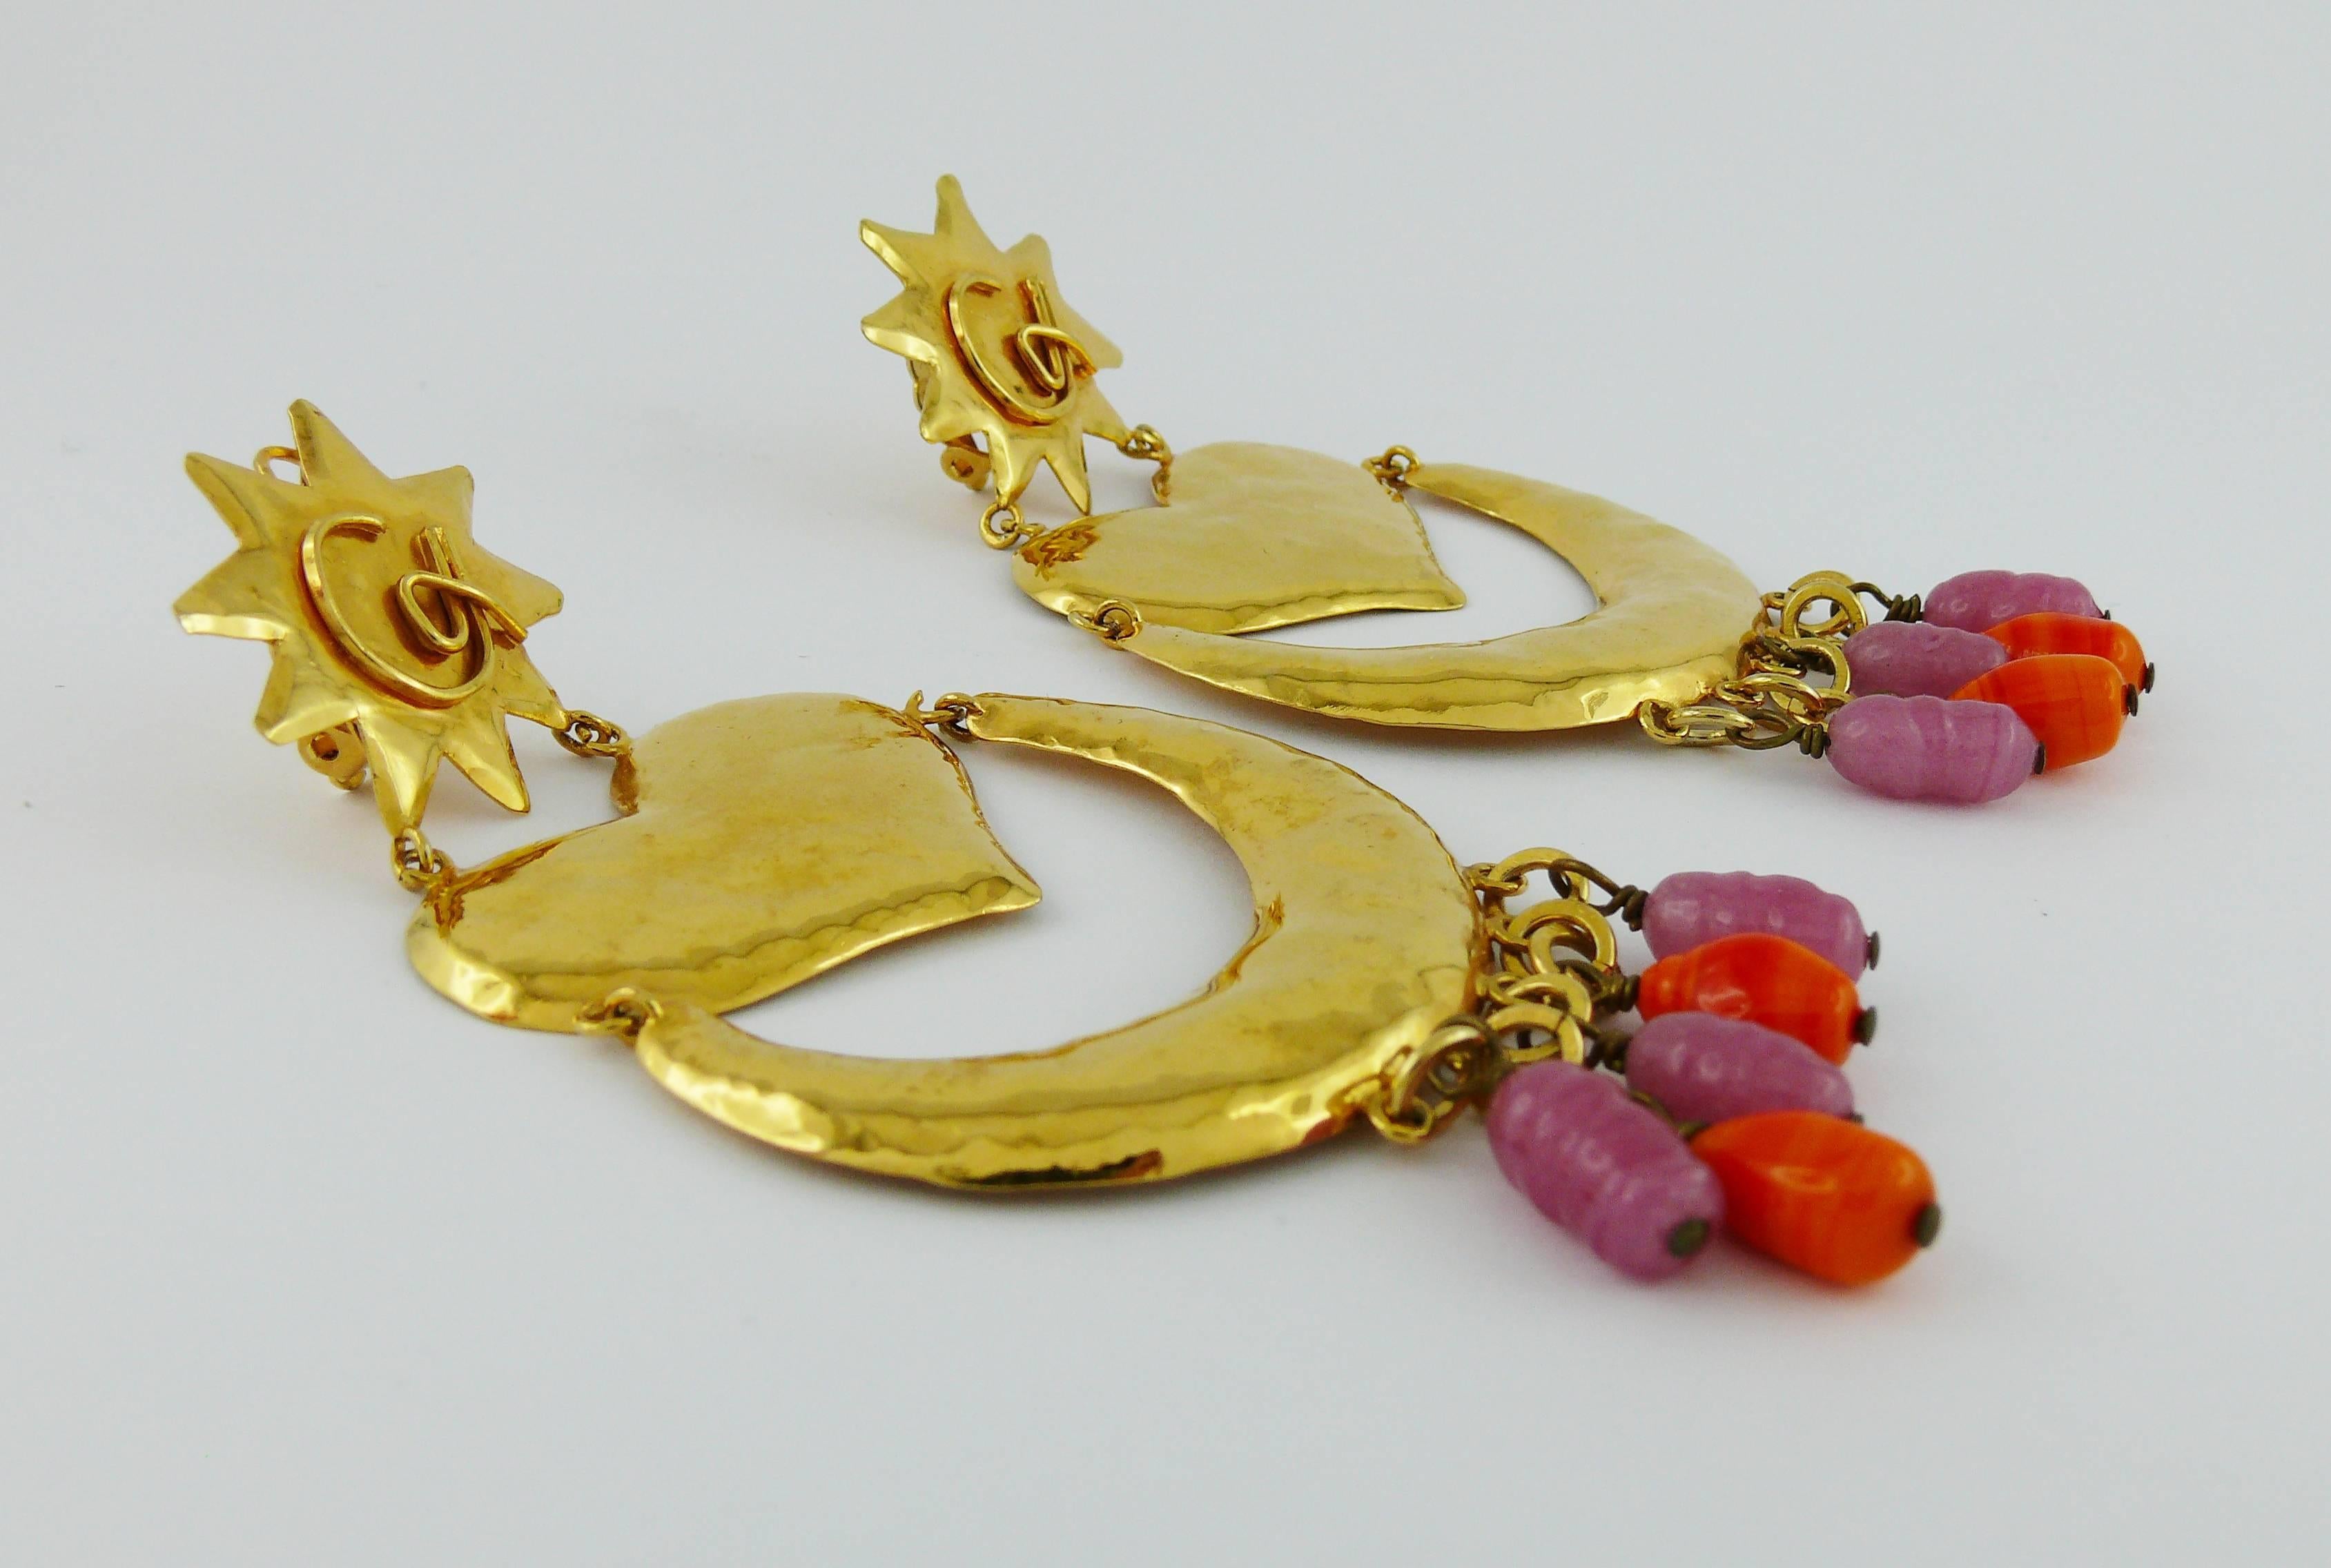 CHRISTIAN LACROIX vintage massive dangling earrings (clip-on) featuring hammered gold toned elements (sun, heart, crescent moon) and glass bead drops.

Marked CHRISTIAN LACROIX CL Made in France.

Indicative measurements : length approx. 10.5 cm